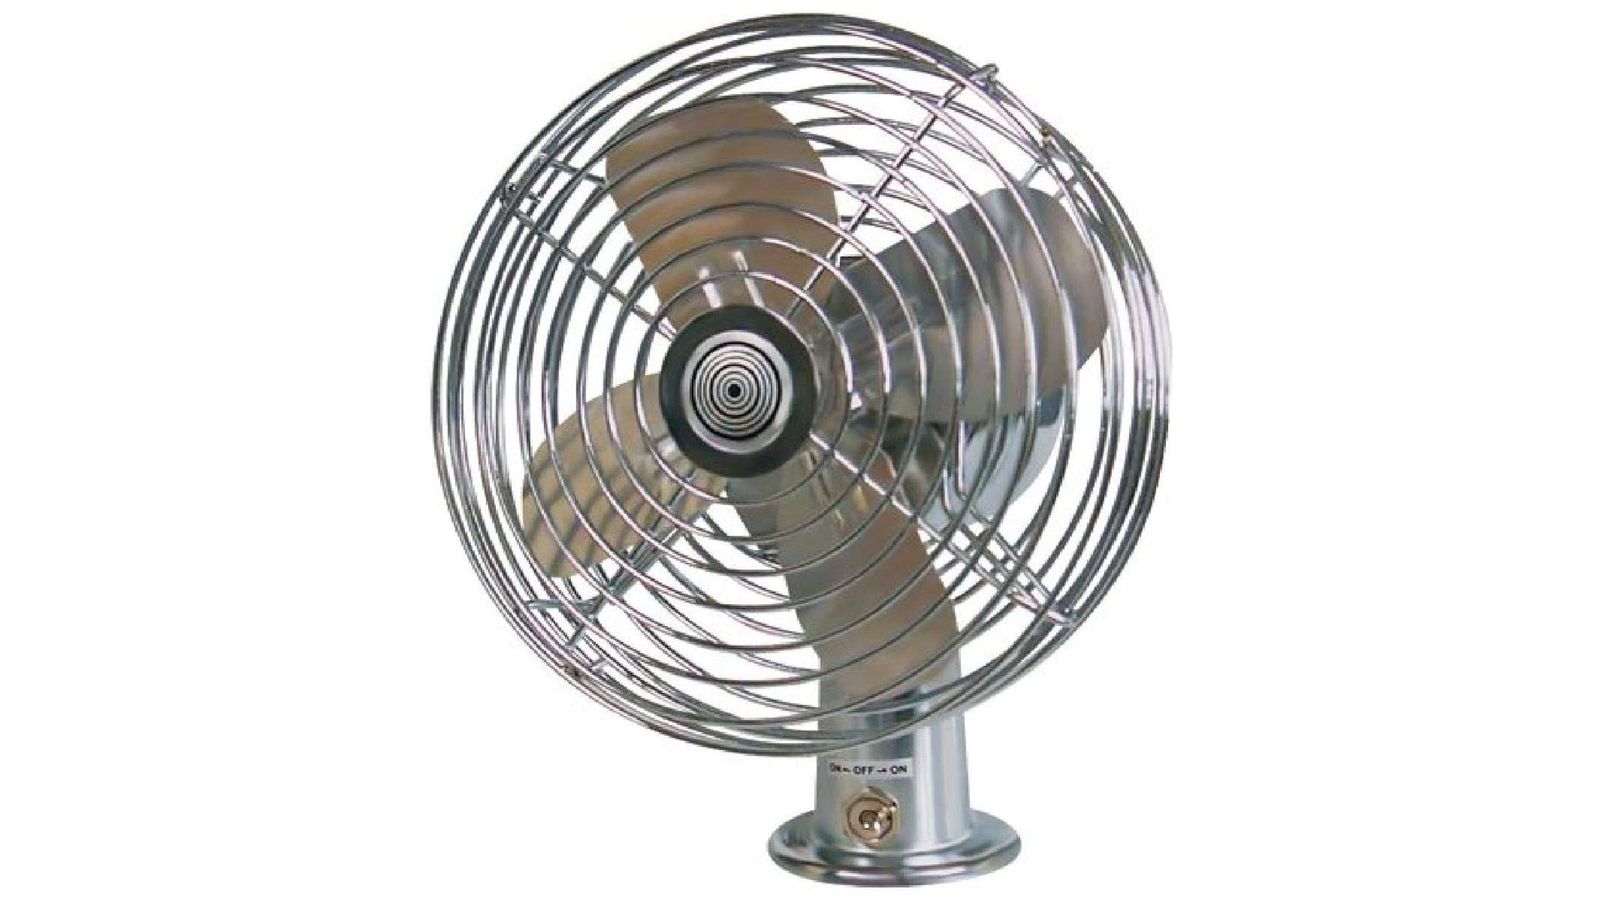 RoadPro RP-1179 product image of a silver fan.